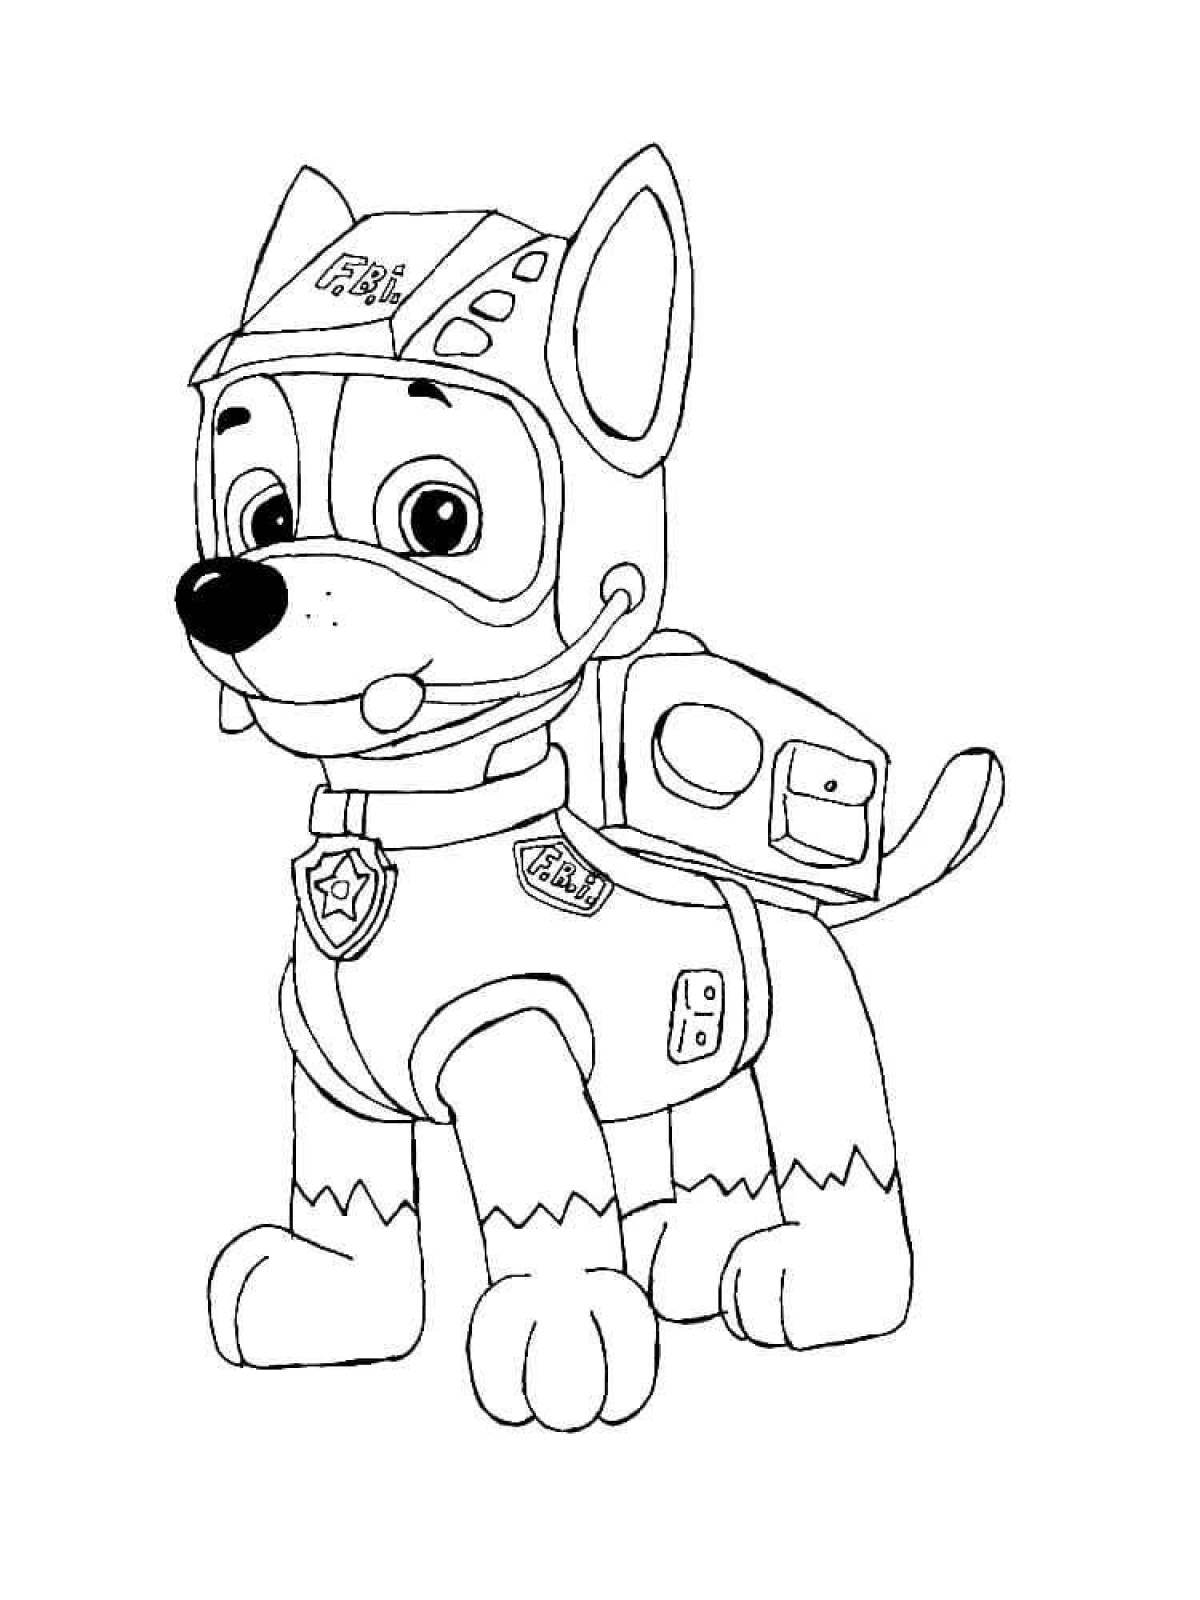 Bright coloring paw patrol racer